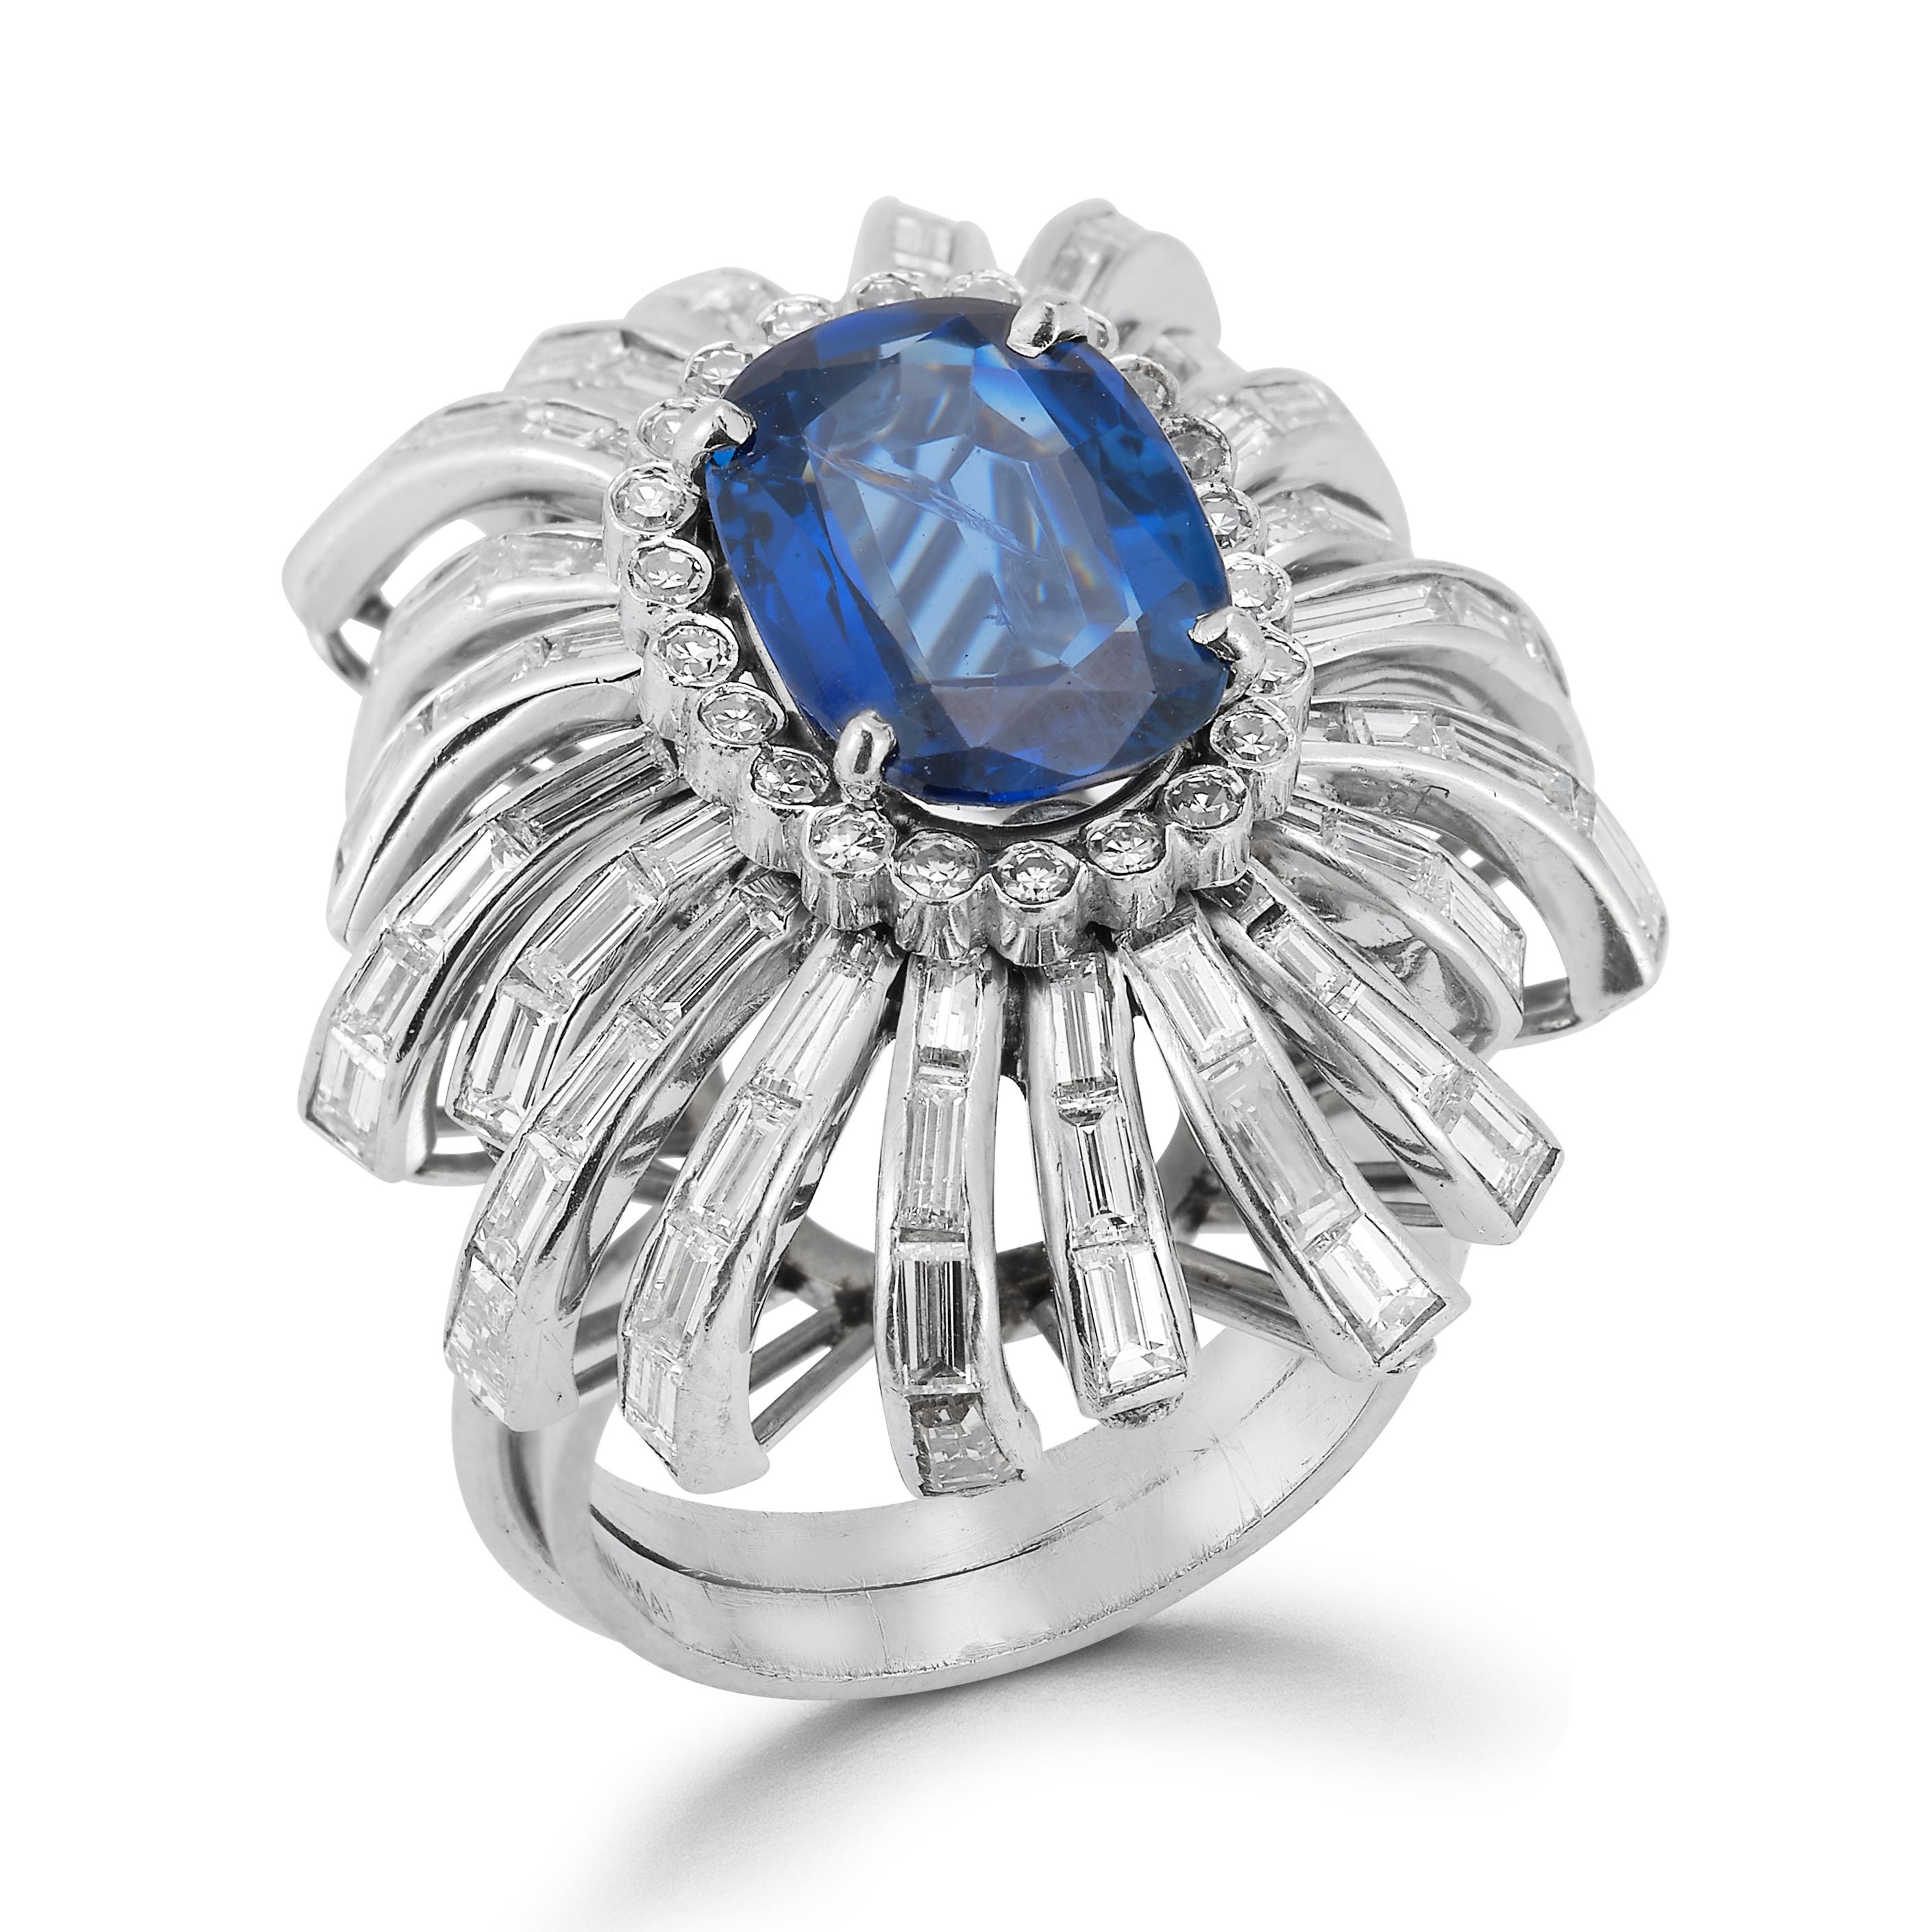  Sapphire & Diamond Cocktail Ring, A platinum and white gold ring set with a central oval sapphire with a halo of round diamonds and 21 rows of baguette diamonds extending outward

Sapphire approximate weight: 4.18

Diamonds total approximate